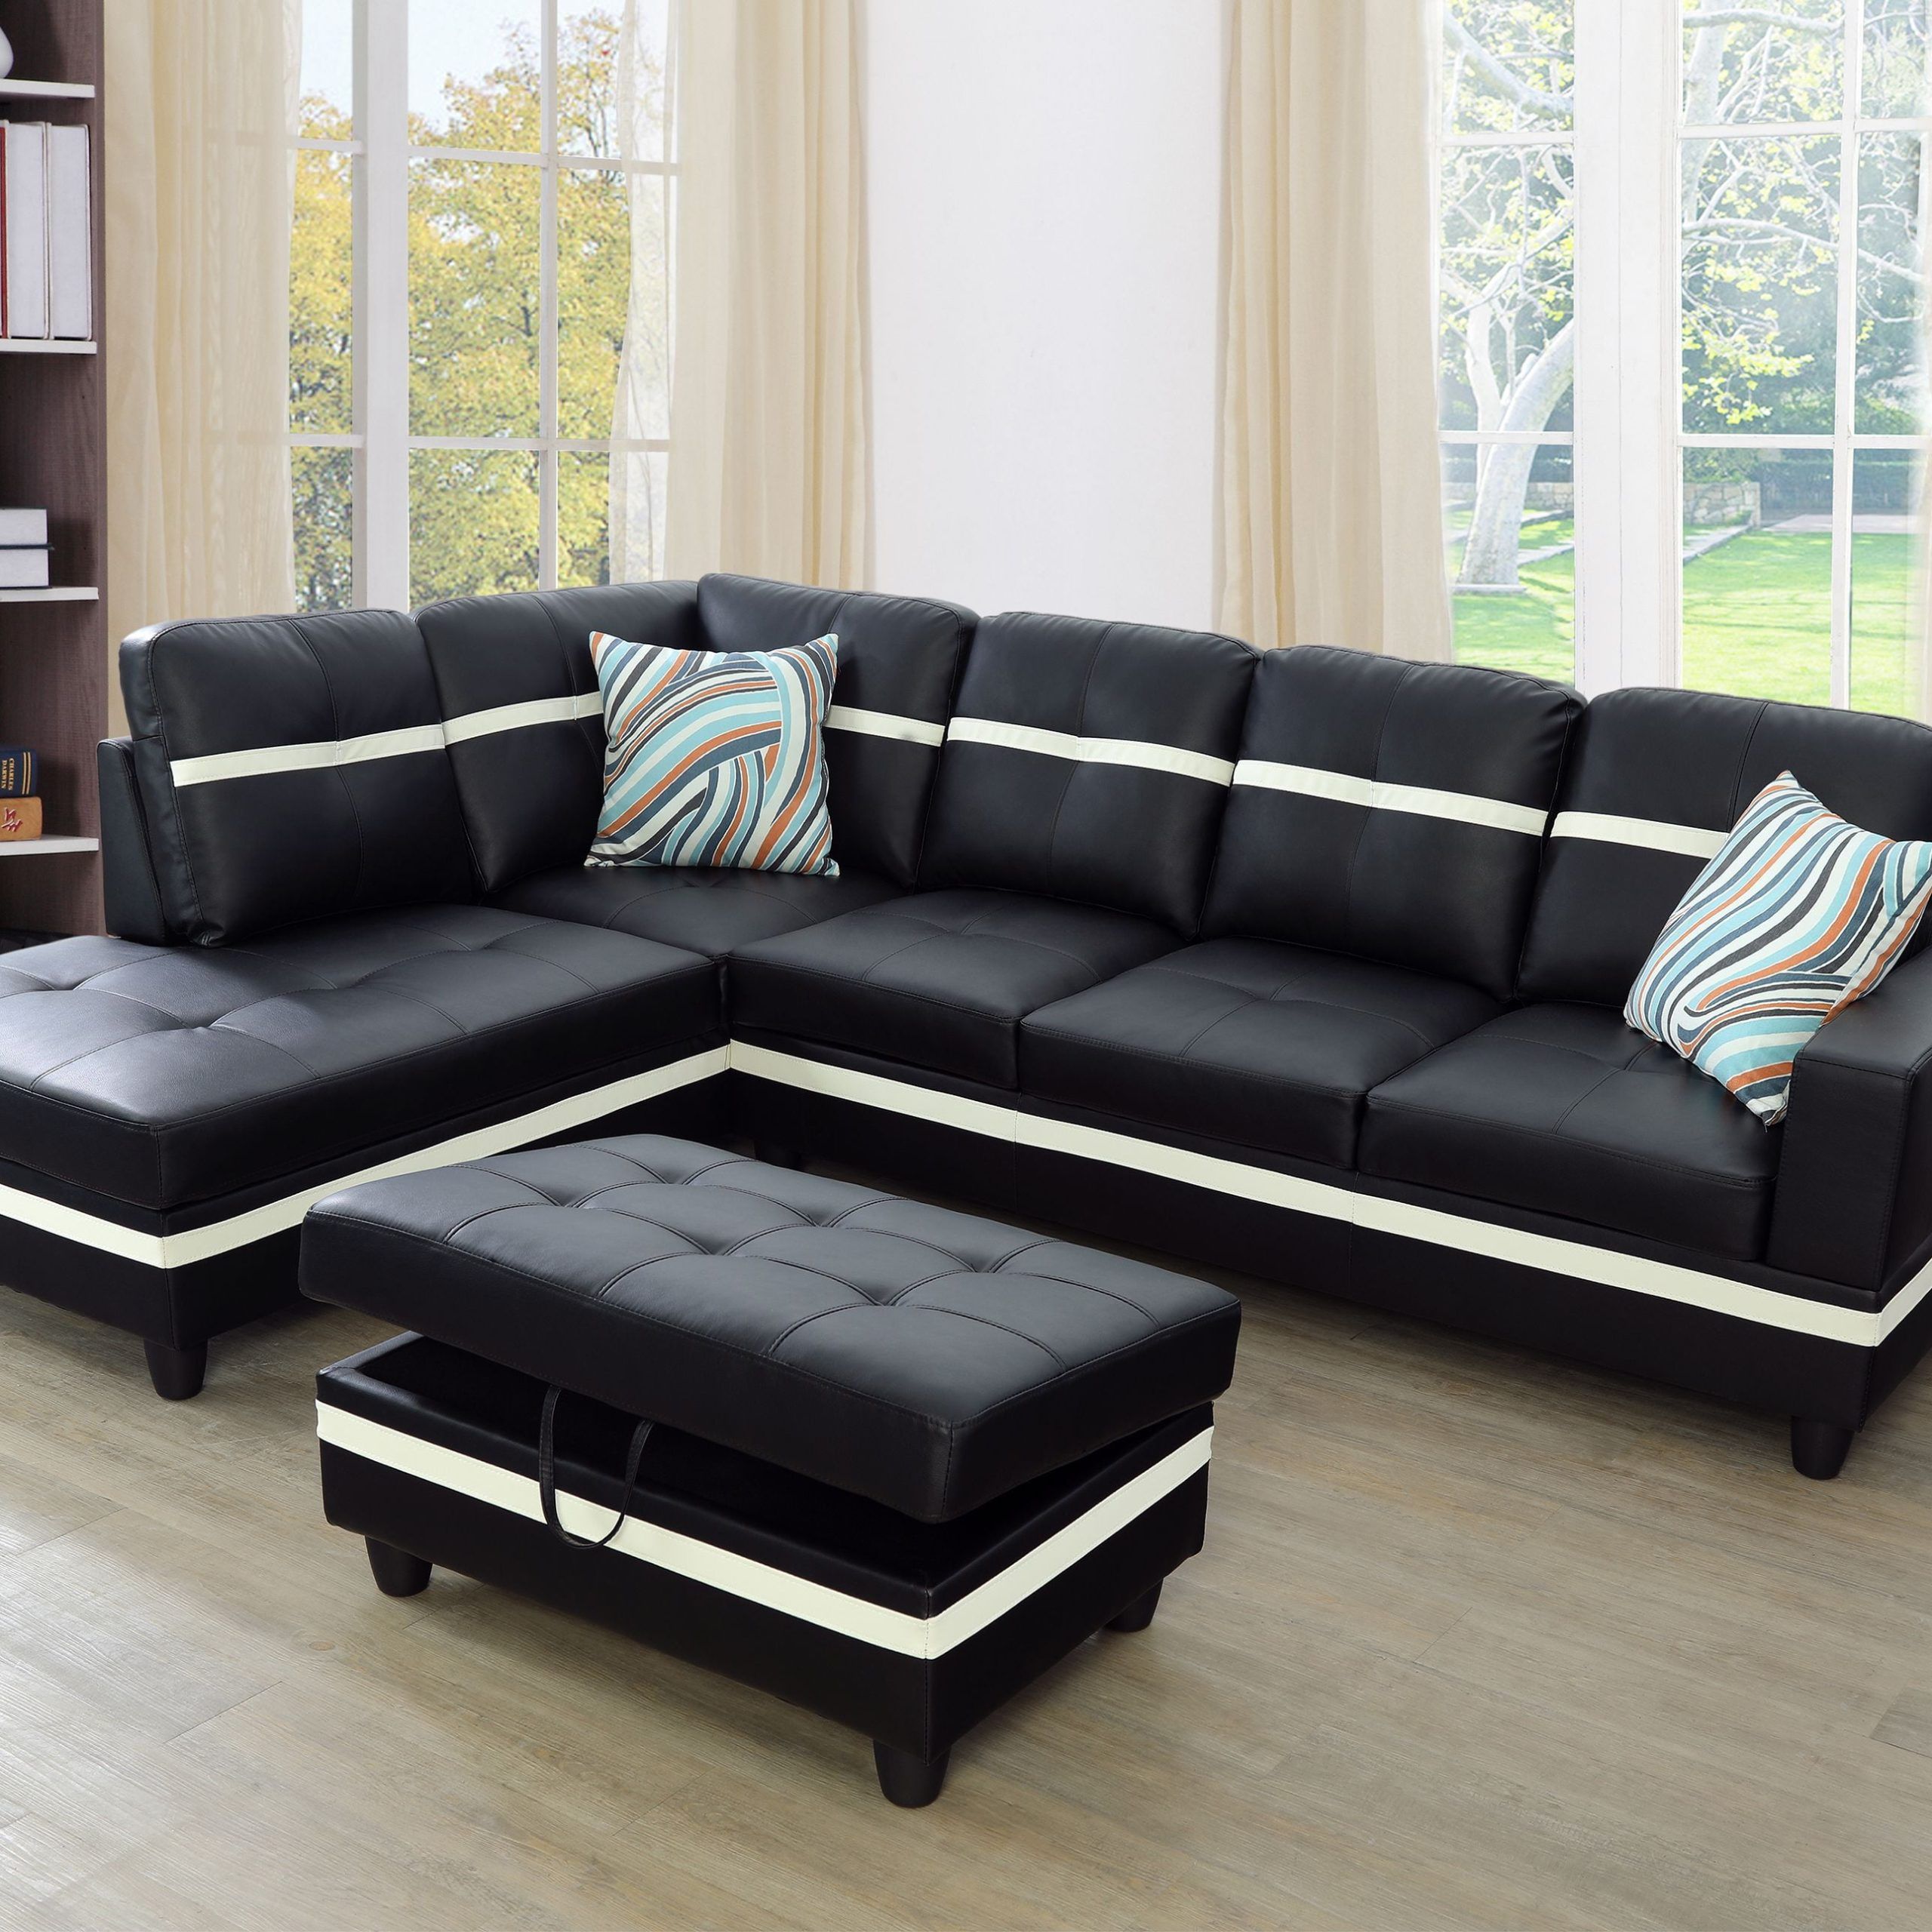 Aycp Furniture New Style  L Shape Sectional Sofa Set With Storage Within Right Facing Black Sofas (View 2 of 20)